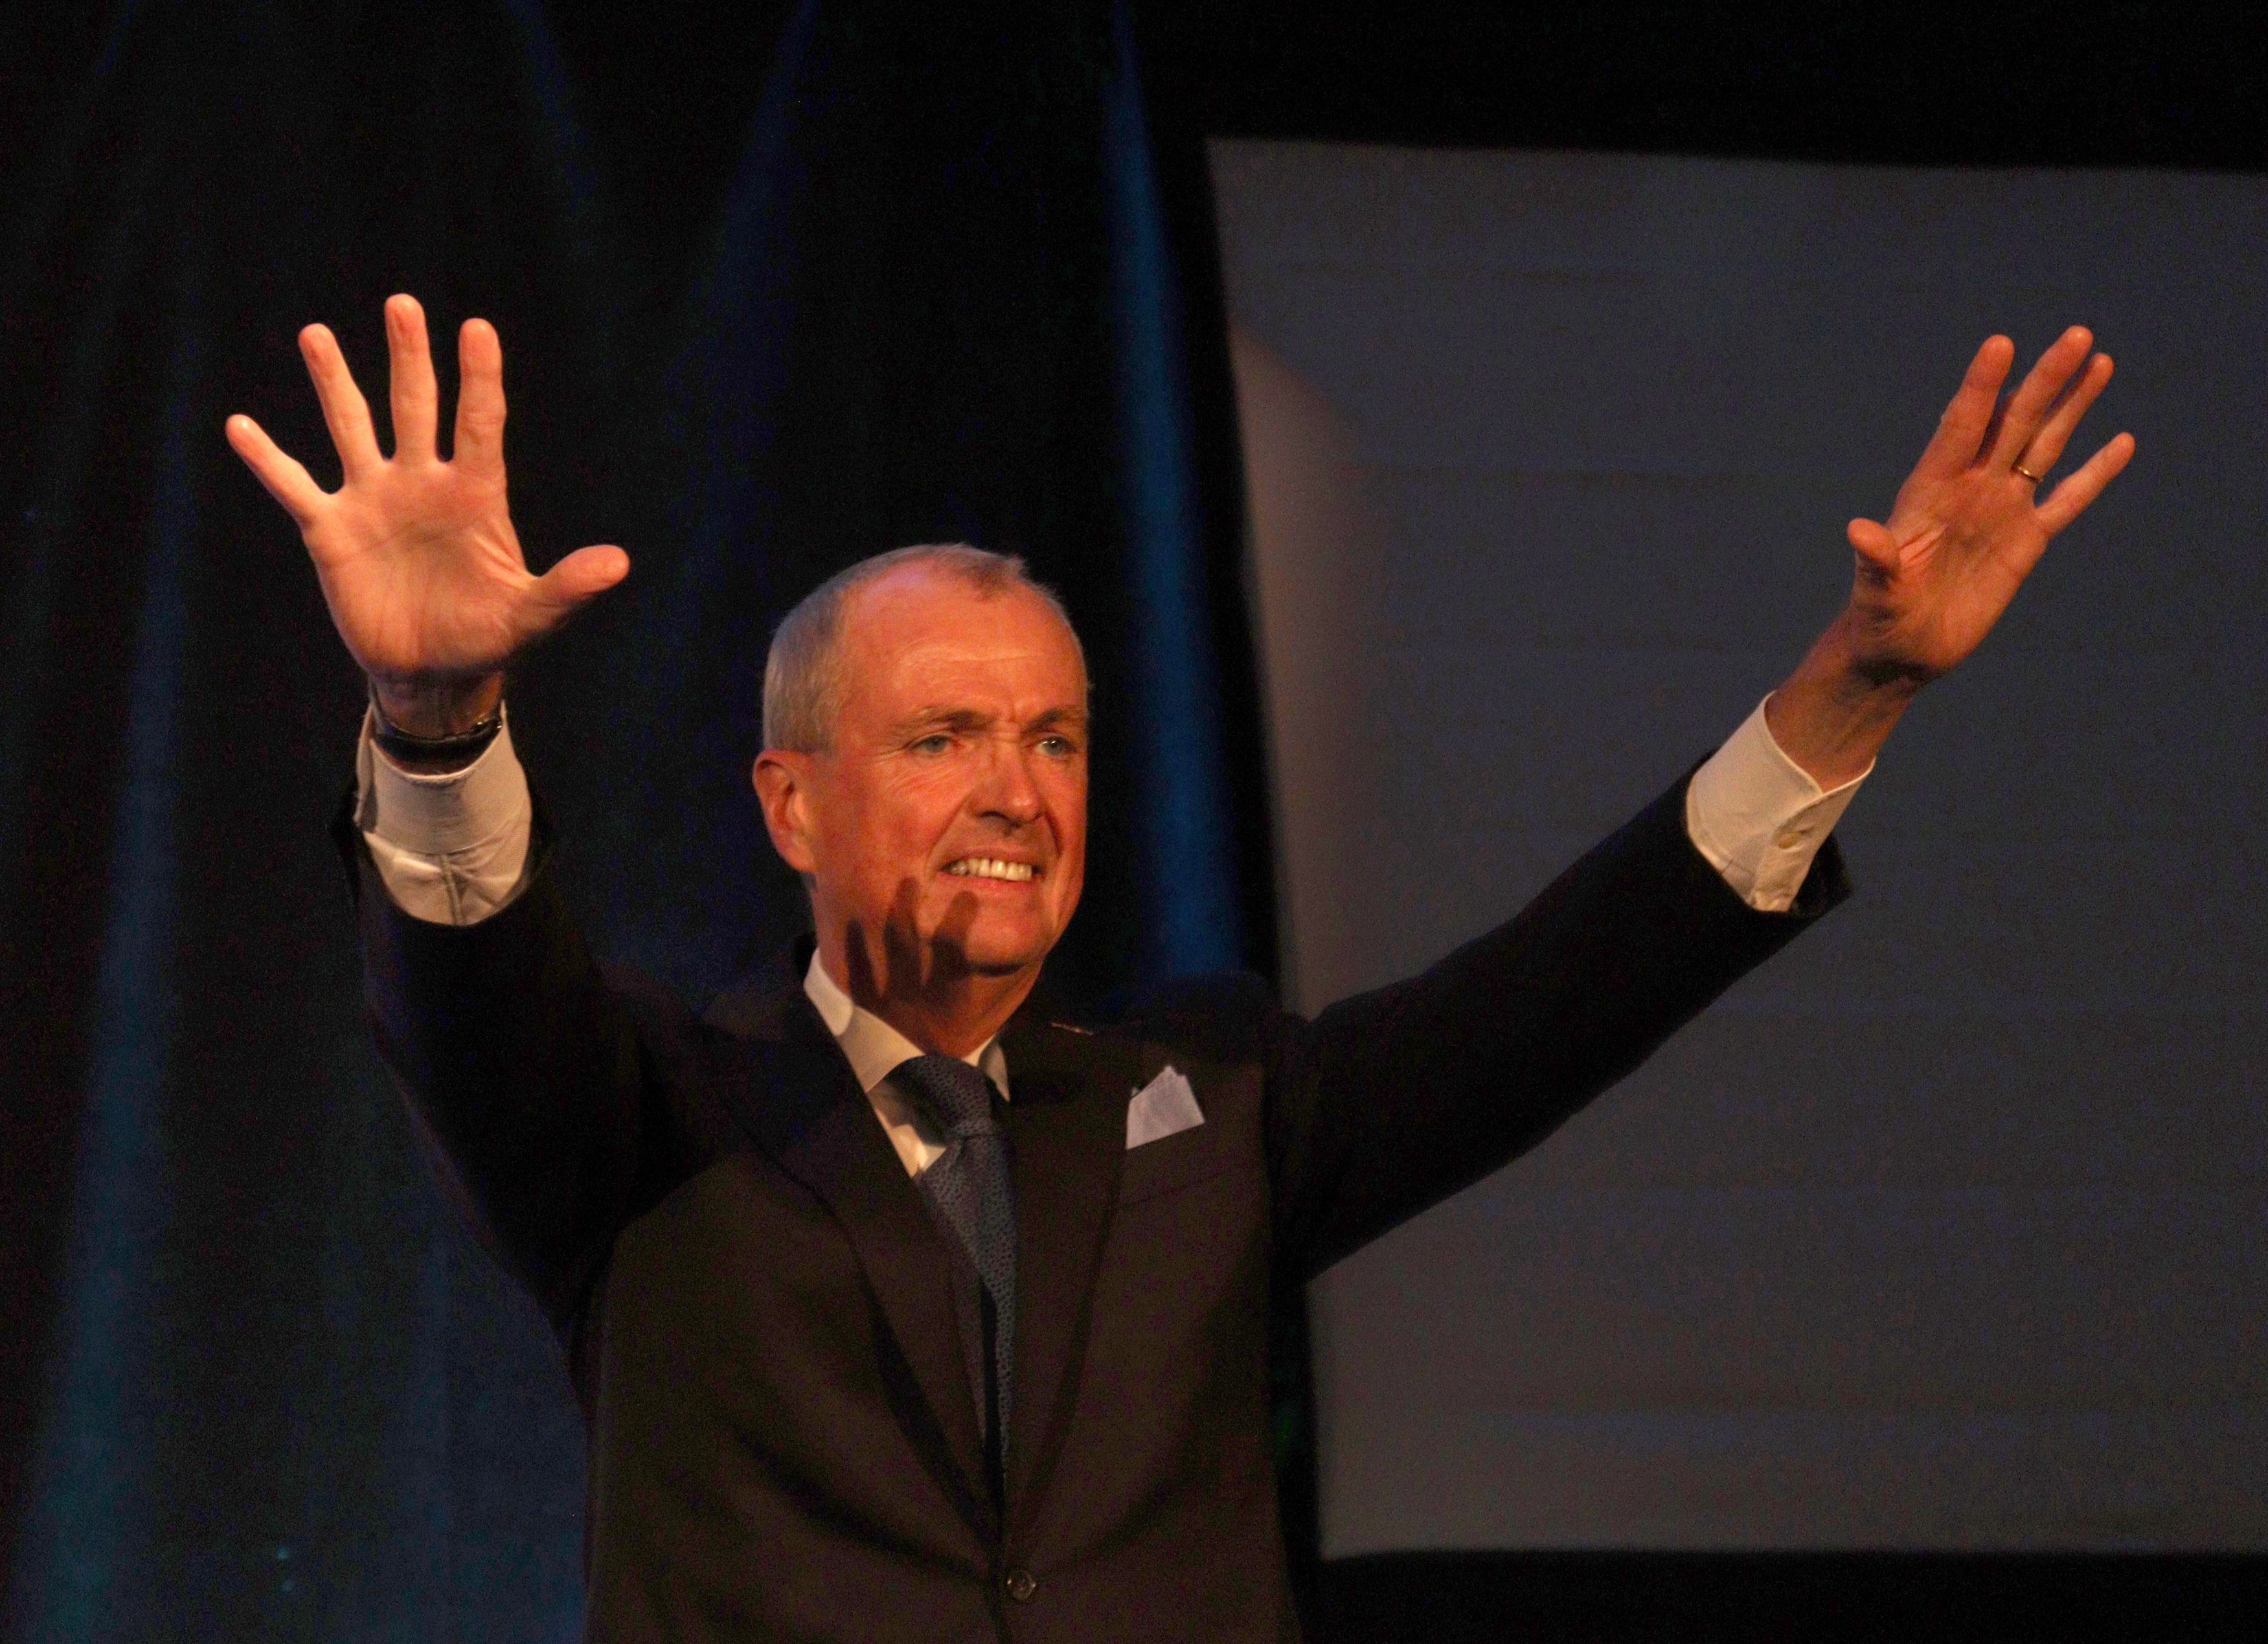 Gov. Phil Murphy takes the stage and waves to supporters at his reelection party in Asbury Park, New Jersey. John LaRosa | The Montclarion